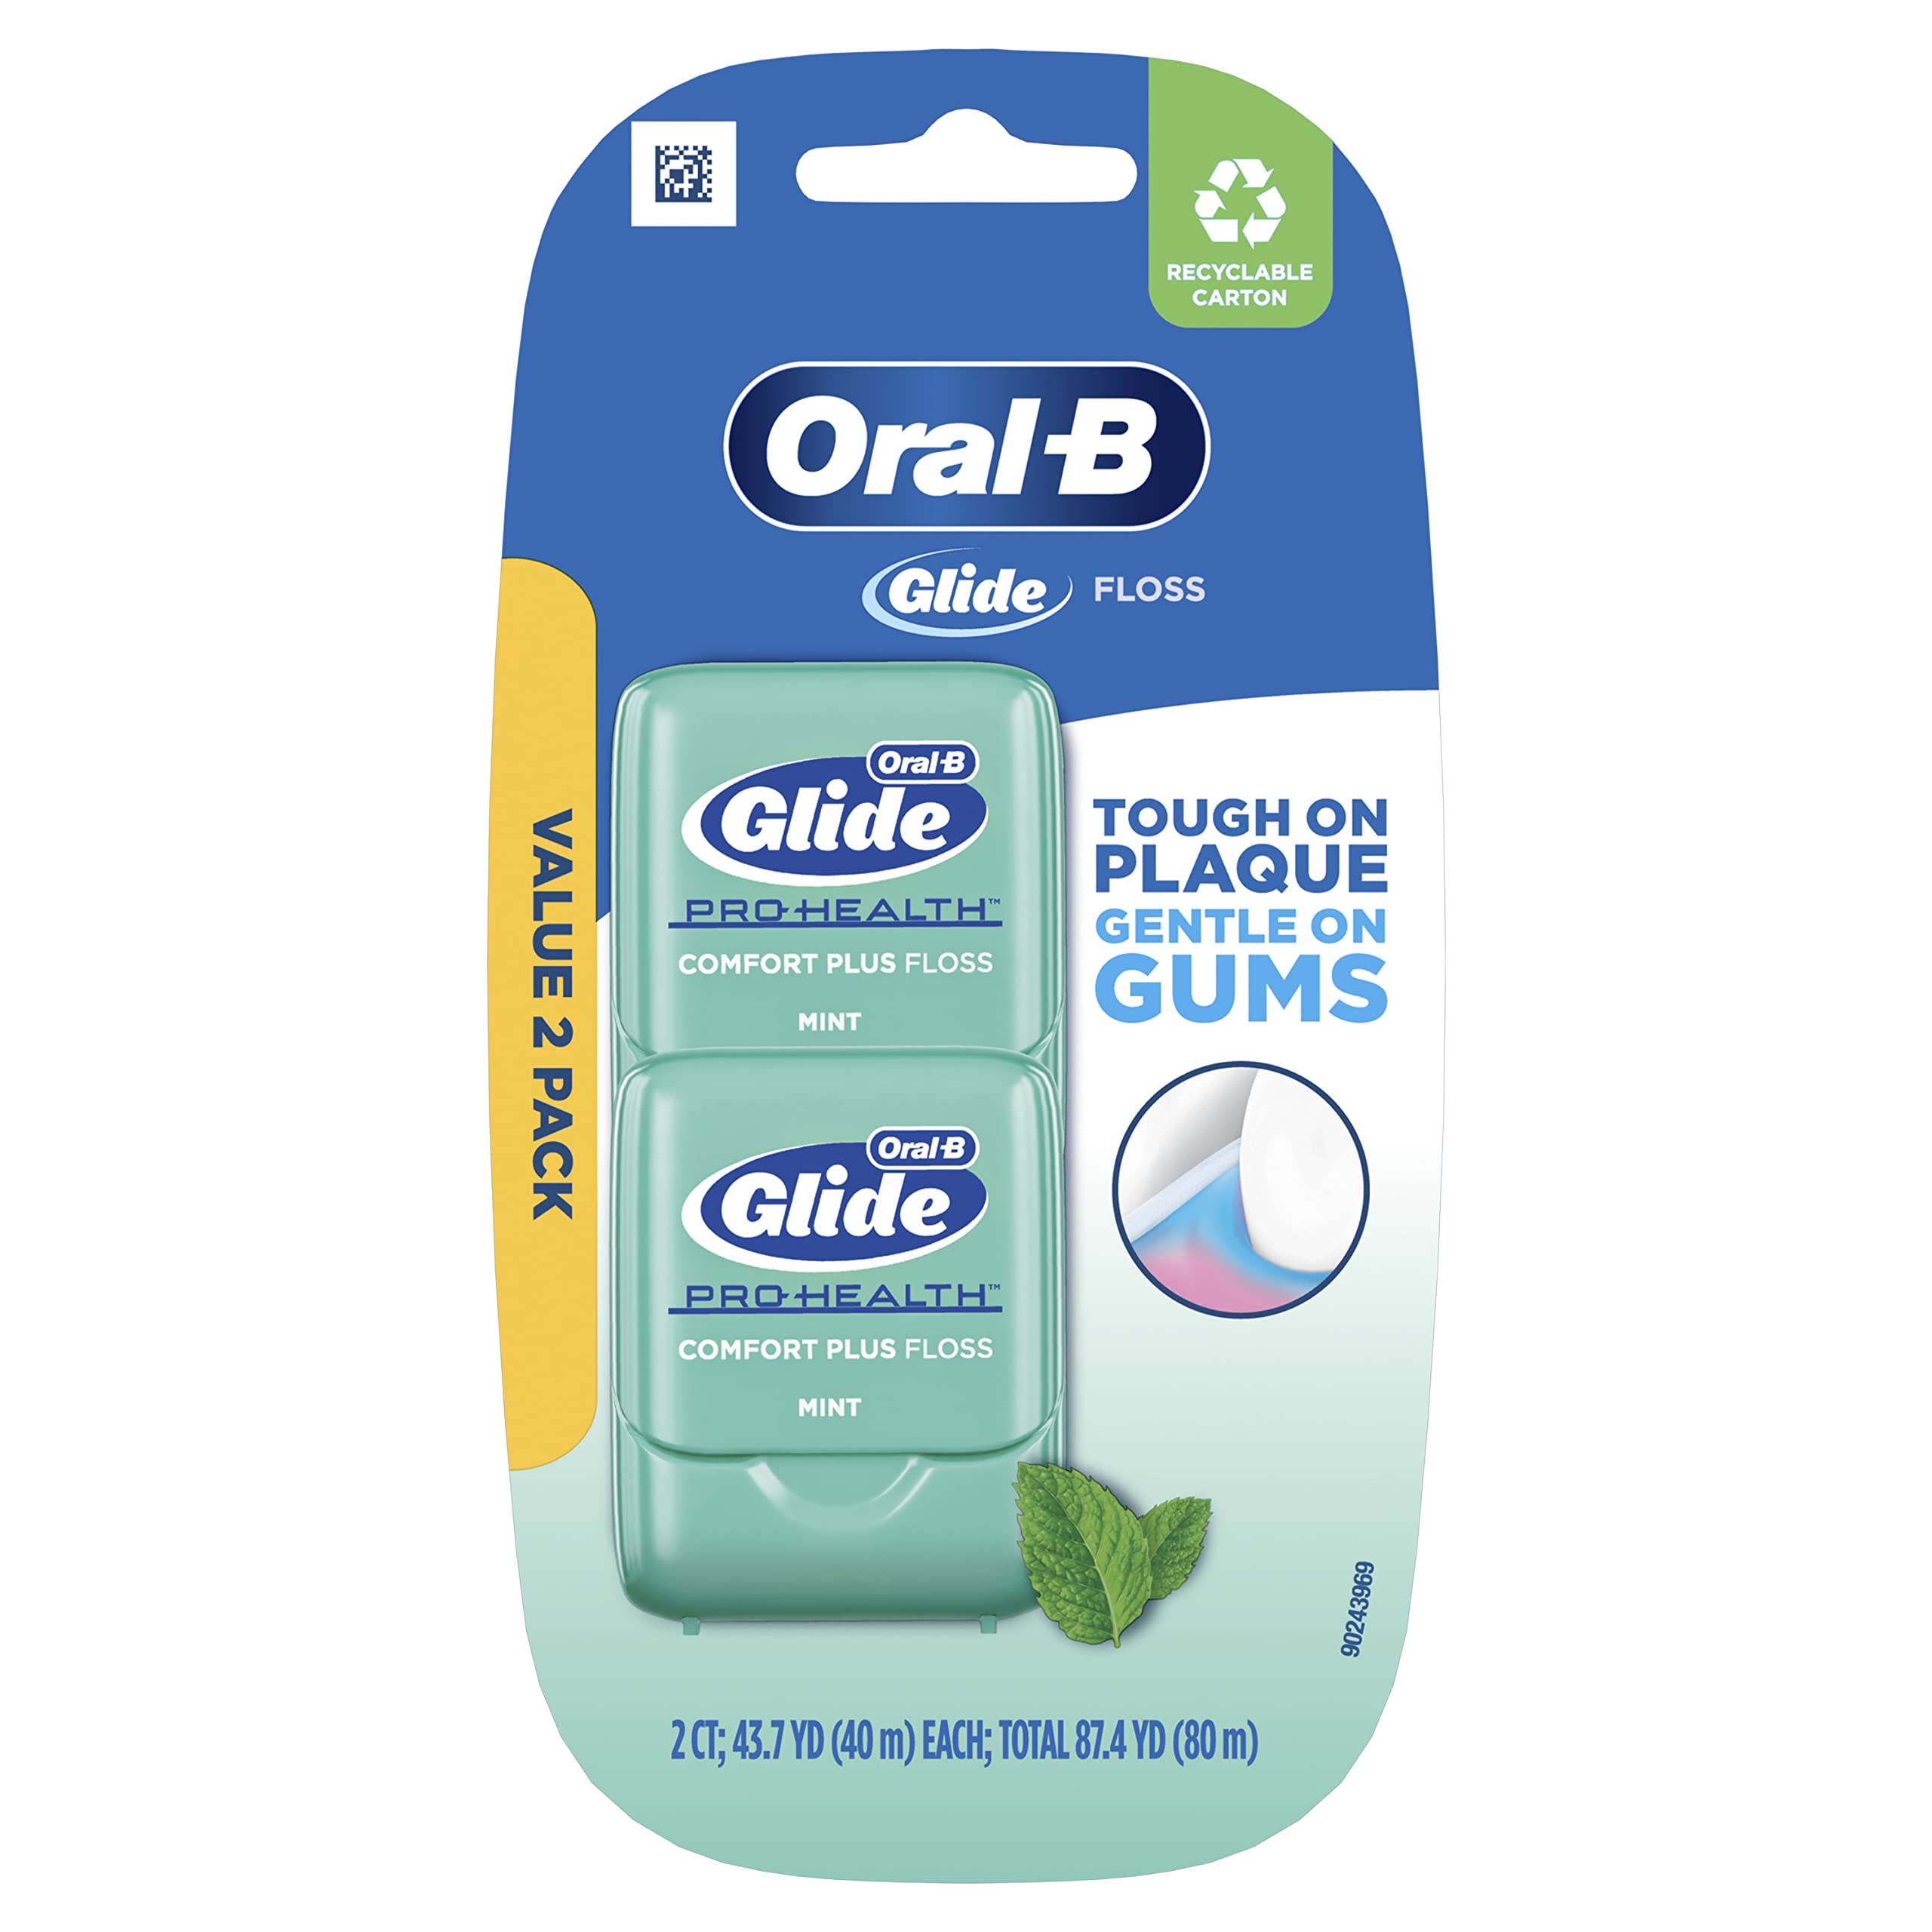 Oral-B Glide Pro-Health Comfort Plus Dental Floss, Extra Soft, Value 2 Pack (40m Each)